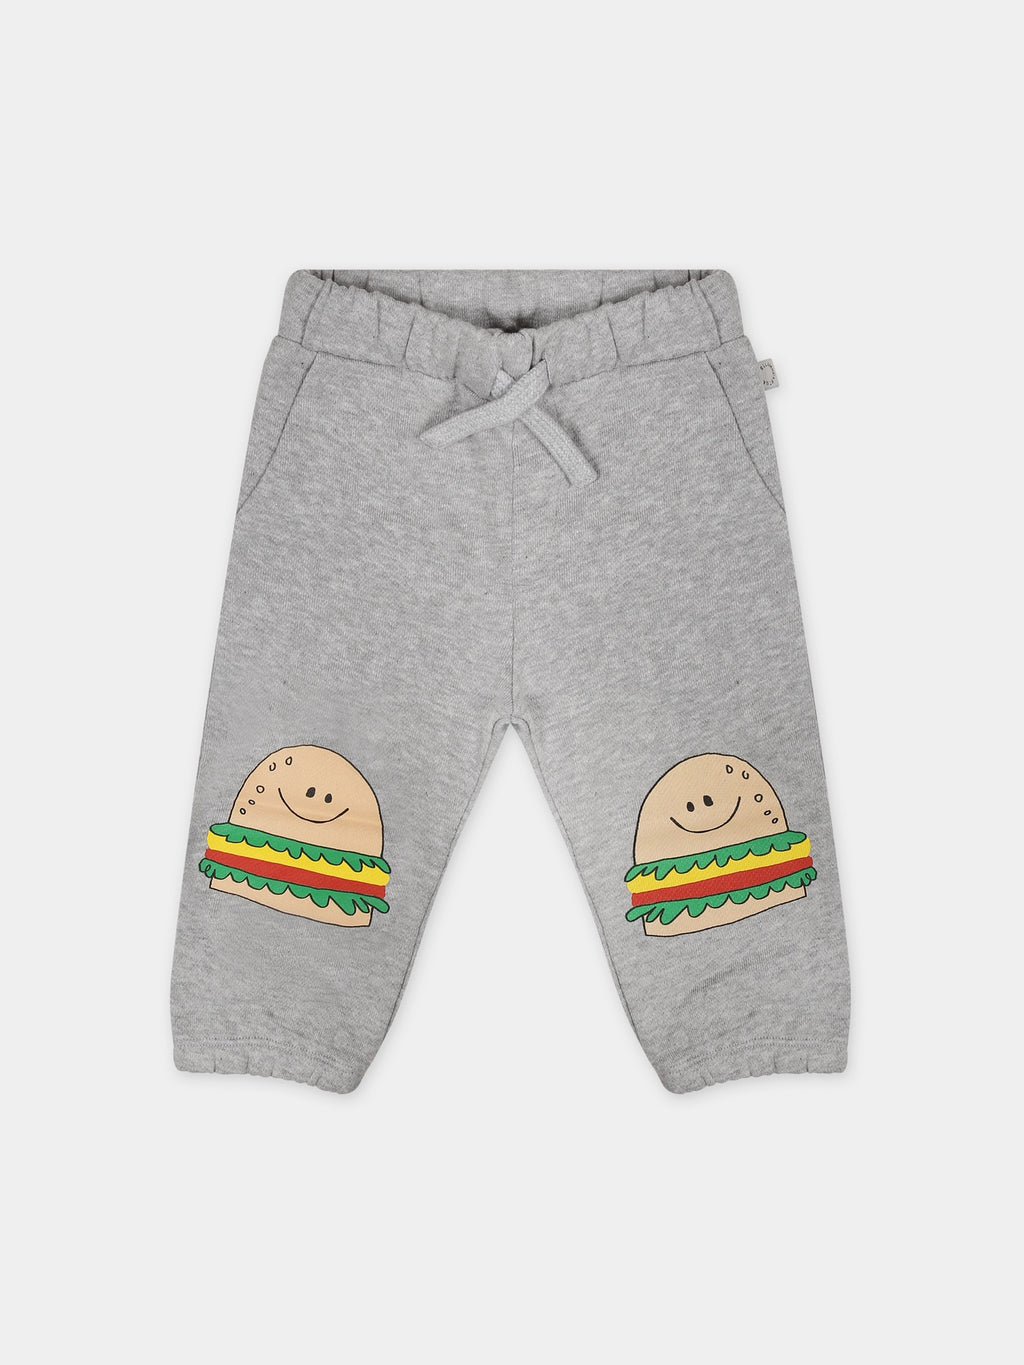 Grey trousers for baby boy with hamburger print